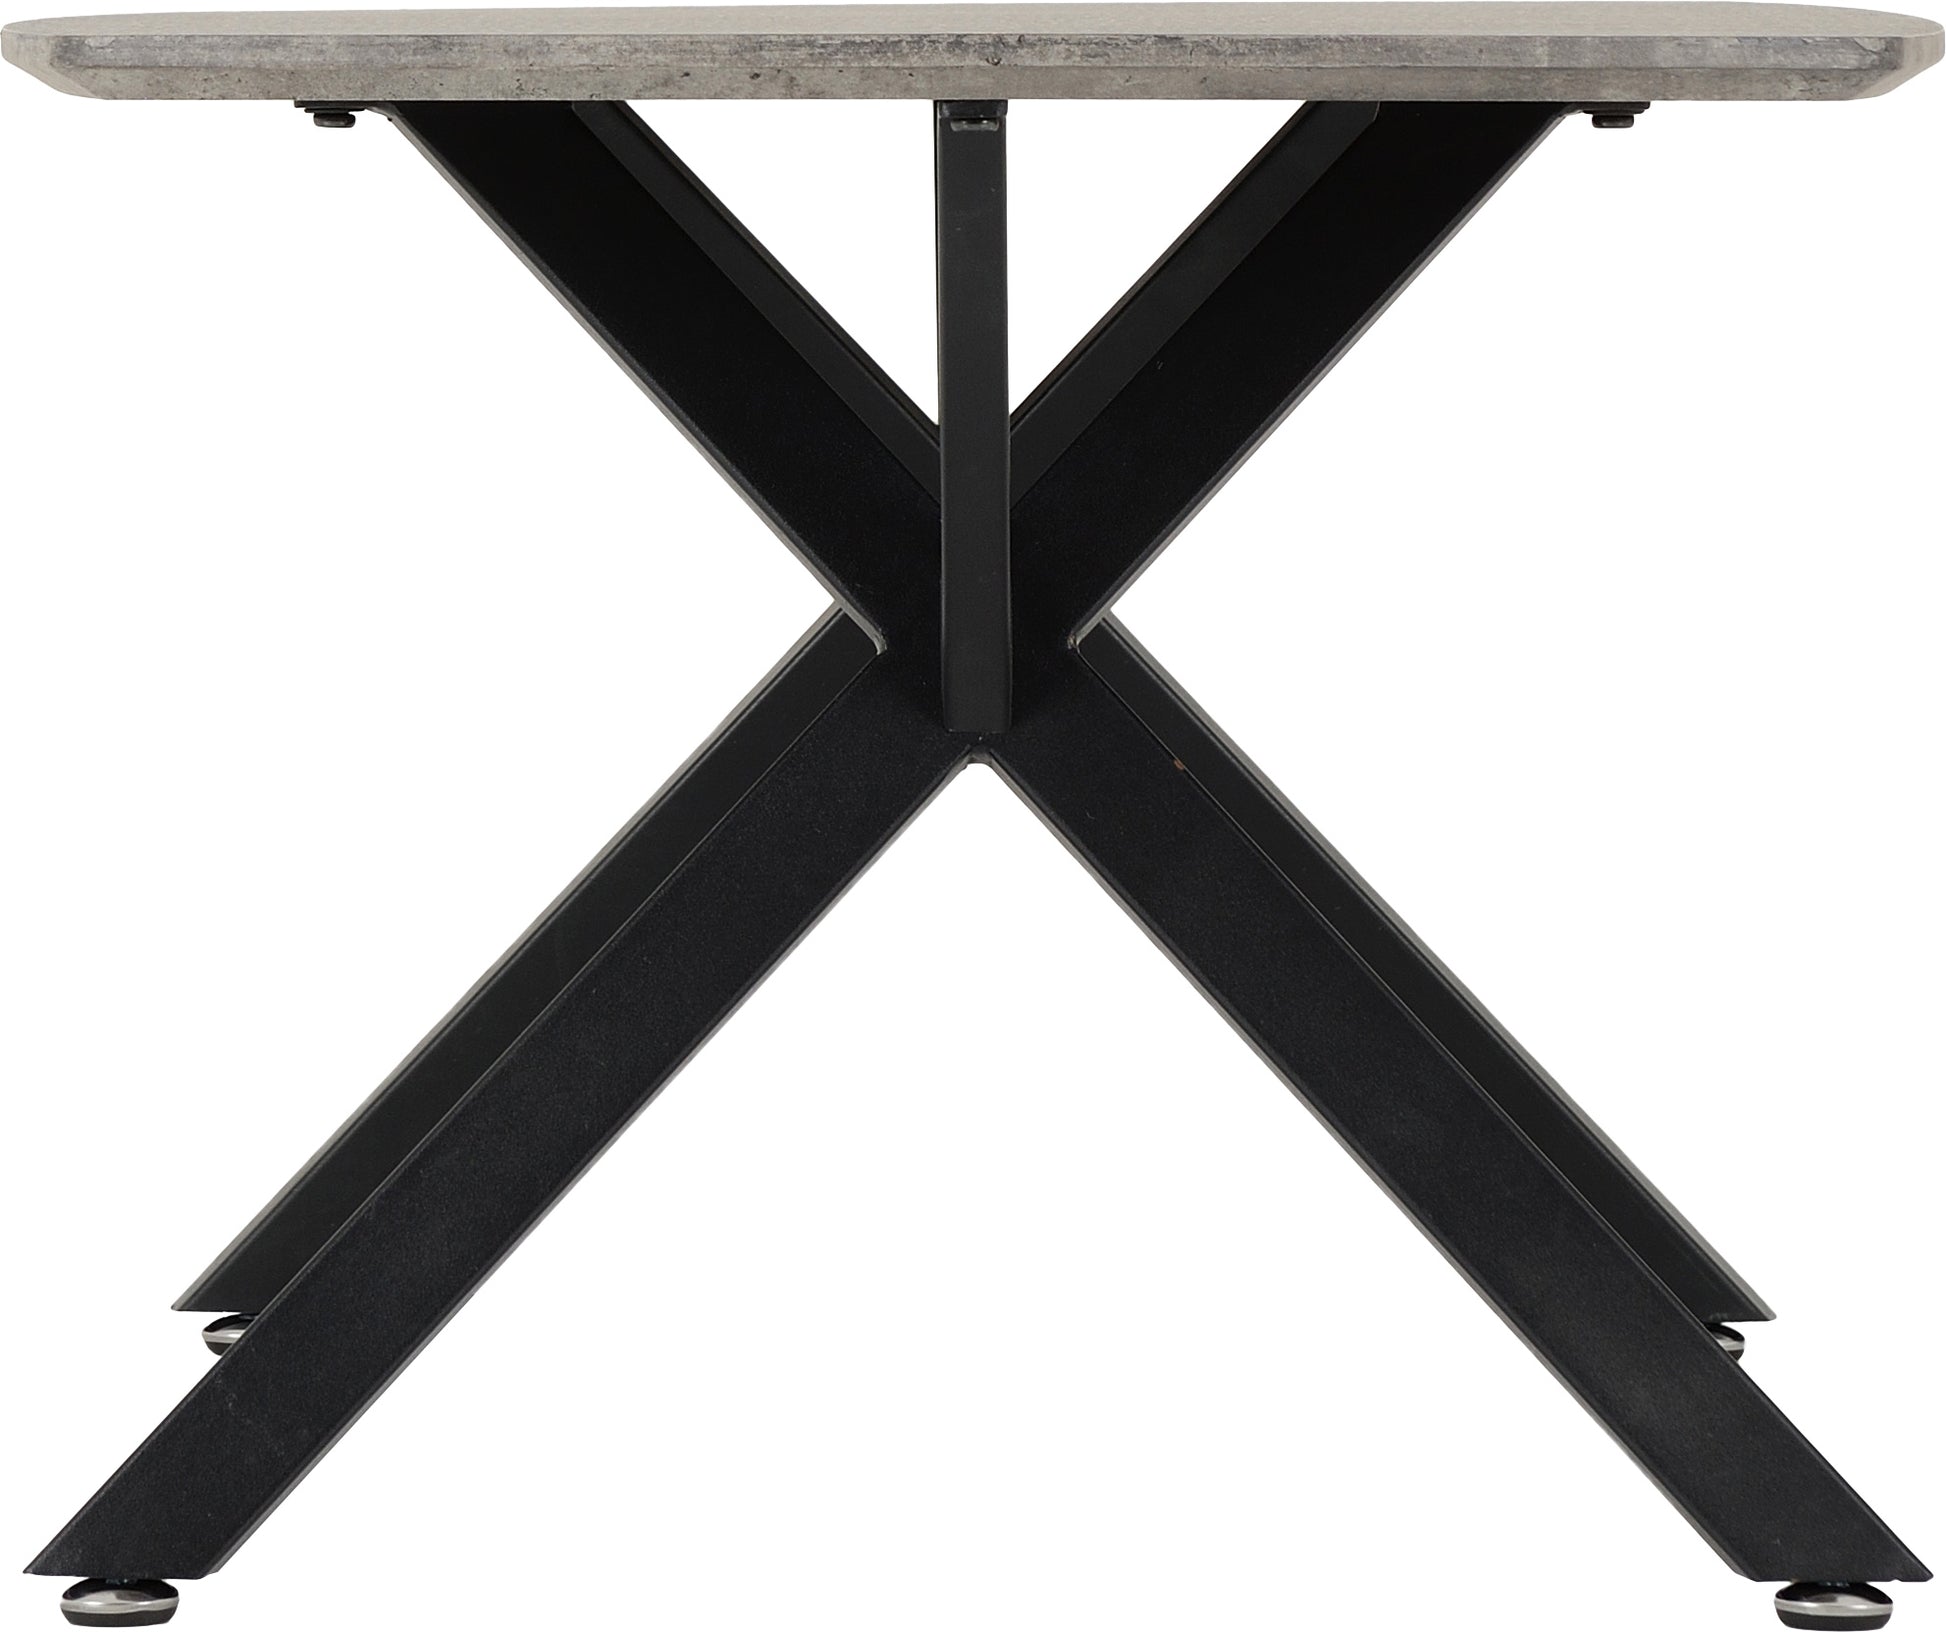 Athens Oval Coffee Table Concrete Effect/Black- The Right Buy Store